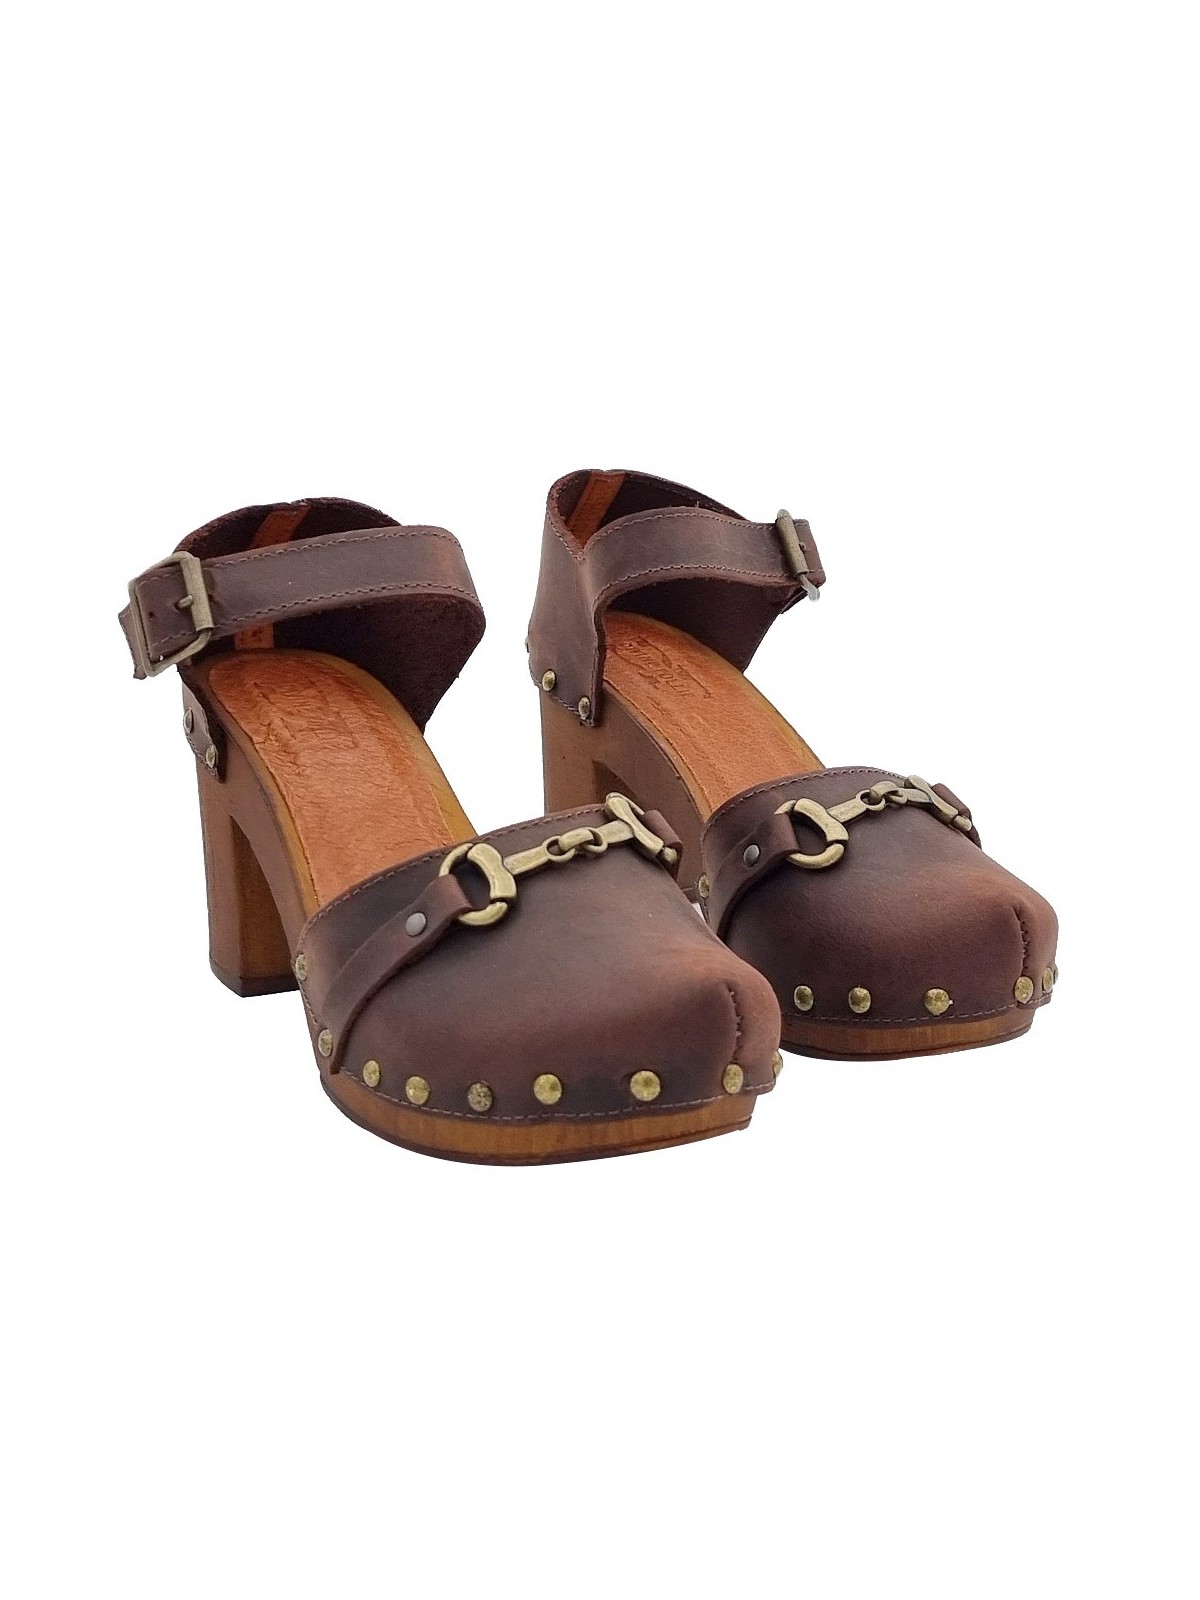 BROWN DUTCH SANDALS WITH ACCESSORY